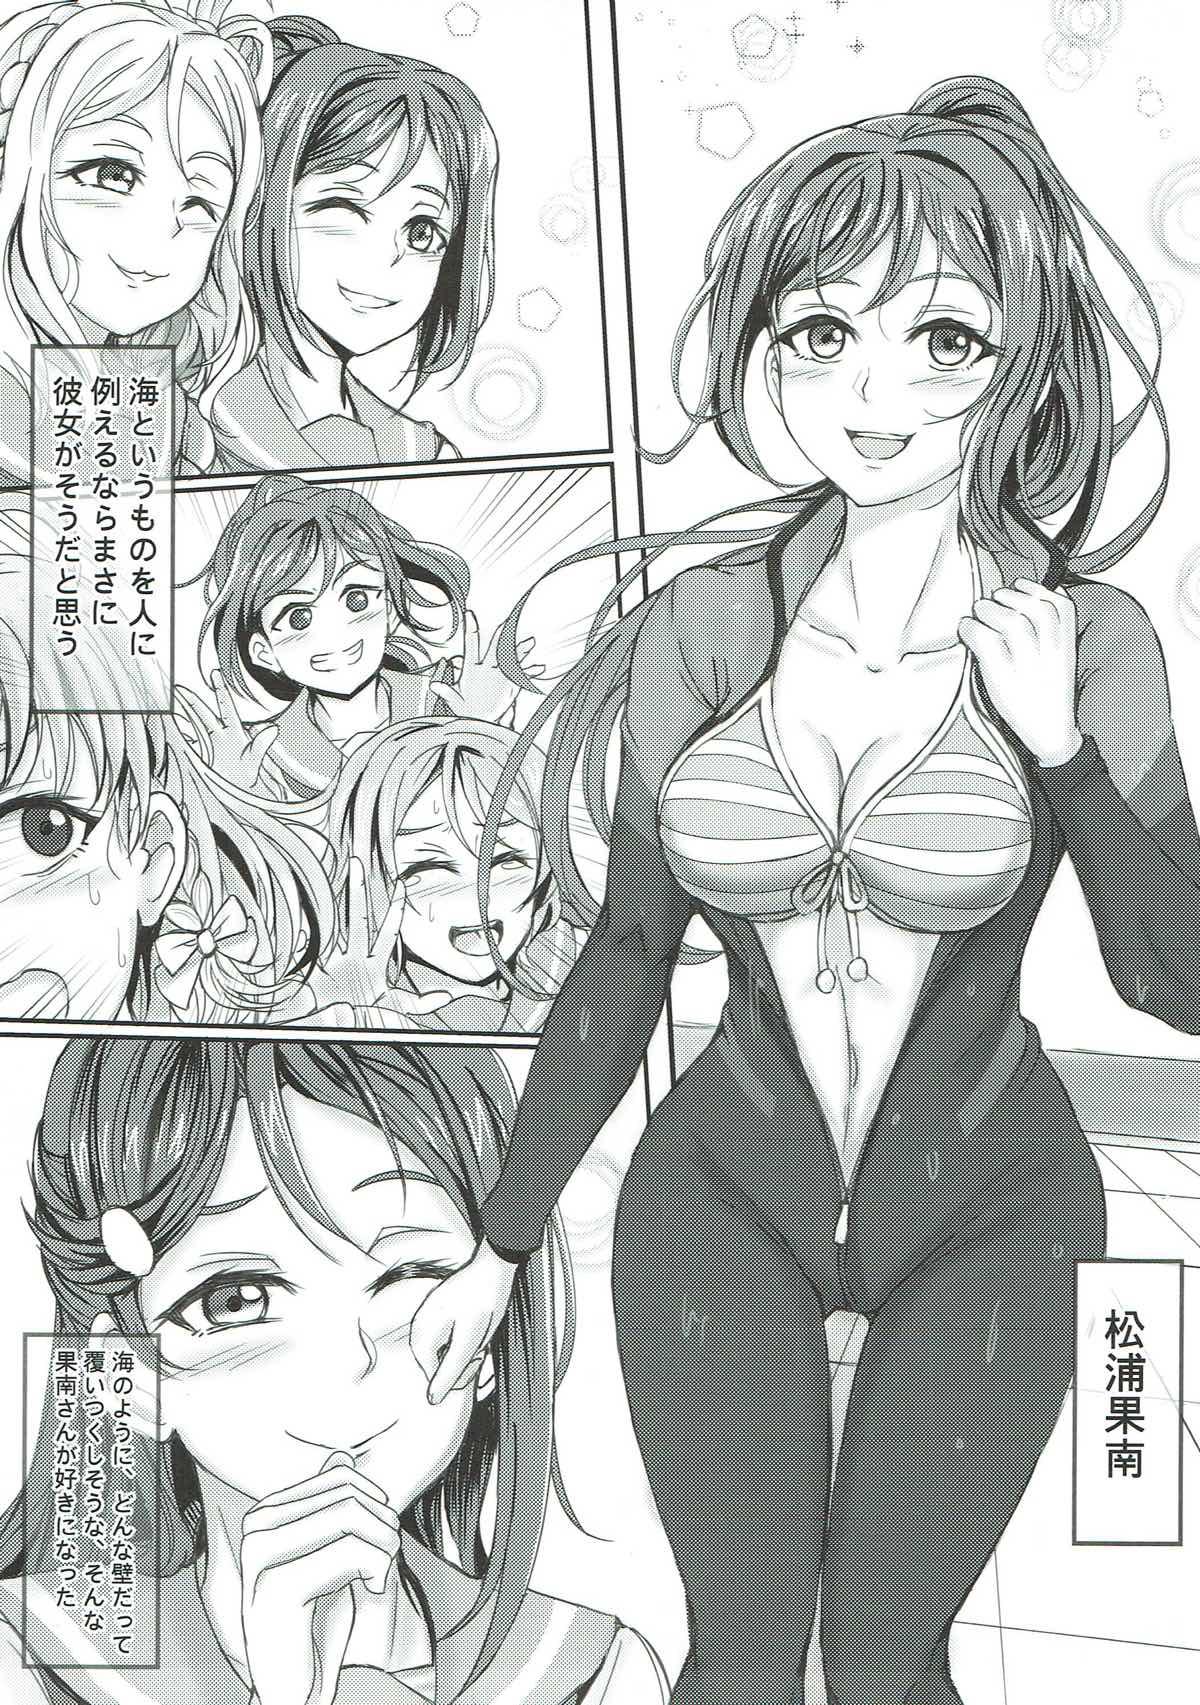 Gostosa Kabe no Mukou - Love live sunshine Young Old - Page 6